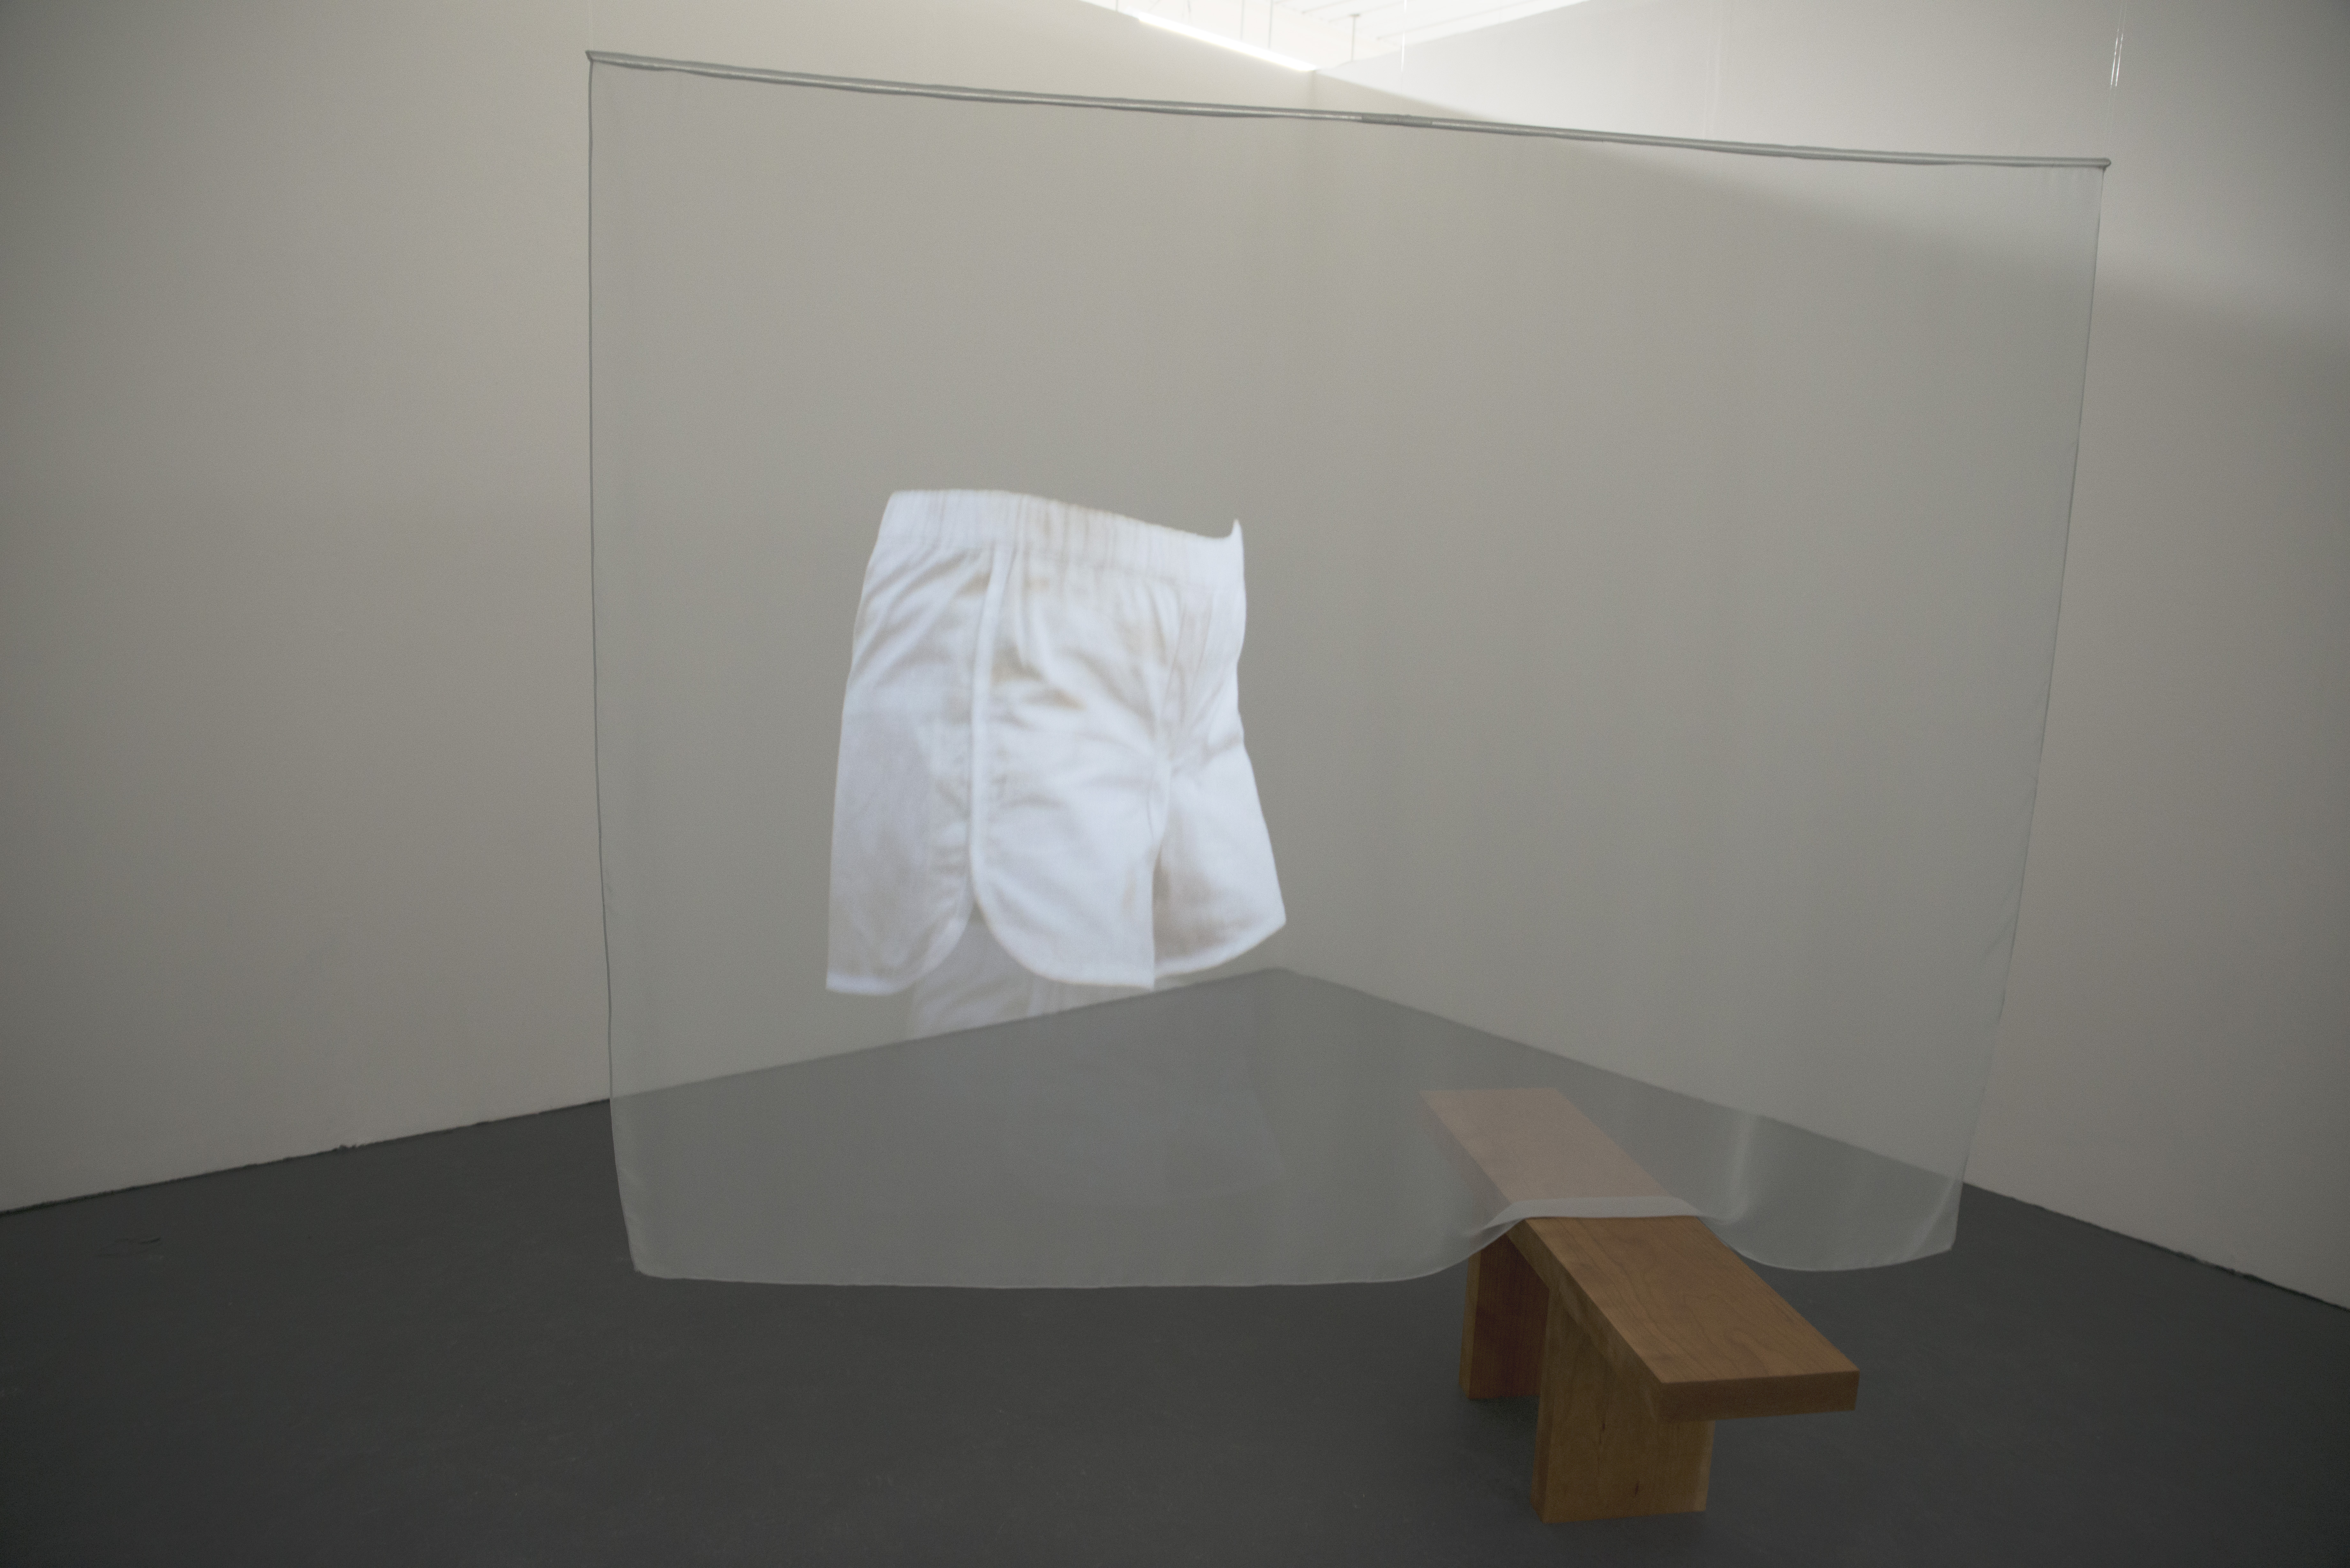 A gallery space filled with a large, human-sized, translucent sheet. This is hanging from the ceiling and one part drapes slightly onto a bench, which perpendicularly intersects the suspended sheet. The large fabric sheet has a white pair of shorts, projected onto it.